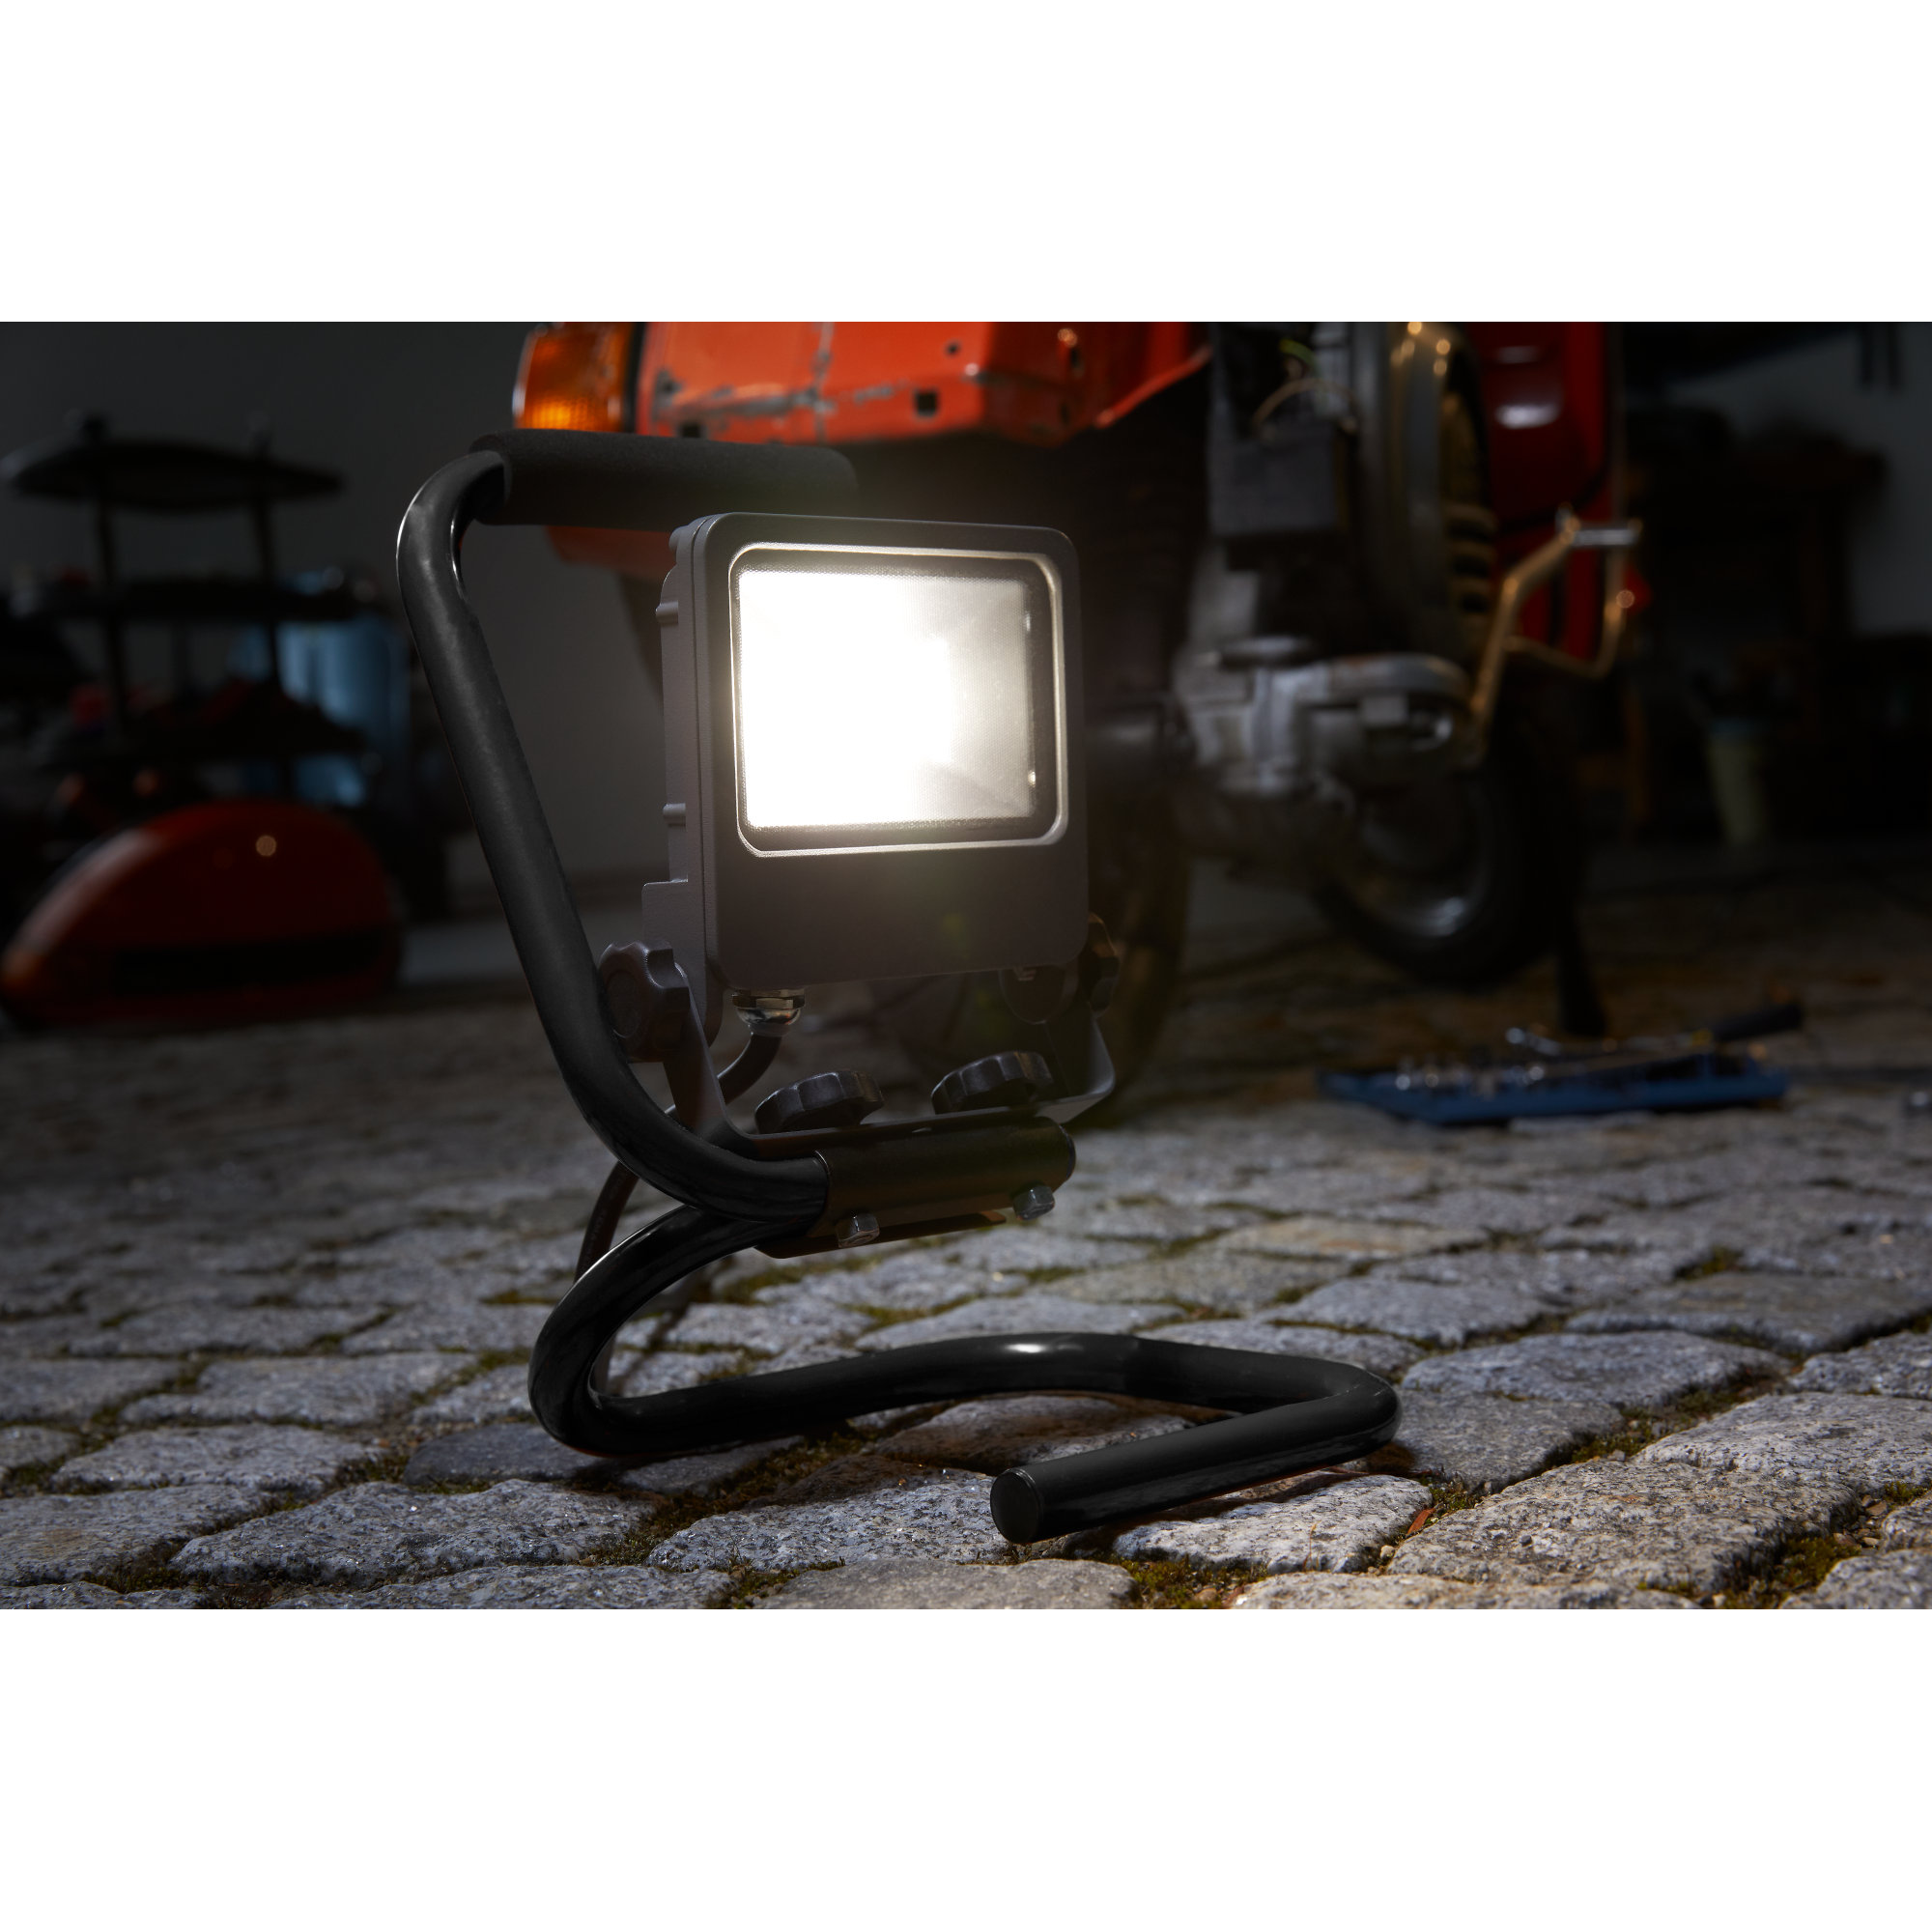 LED-Baustrahler 'Worklights' grau 1440 lm, IP 65 + product picture